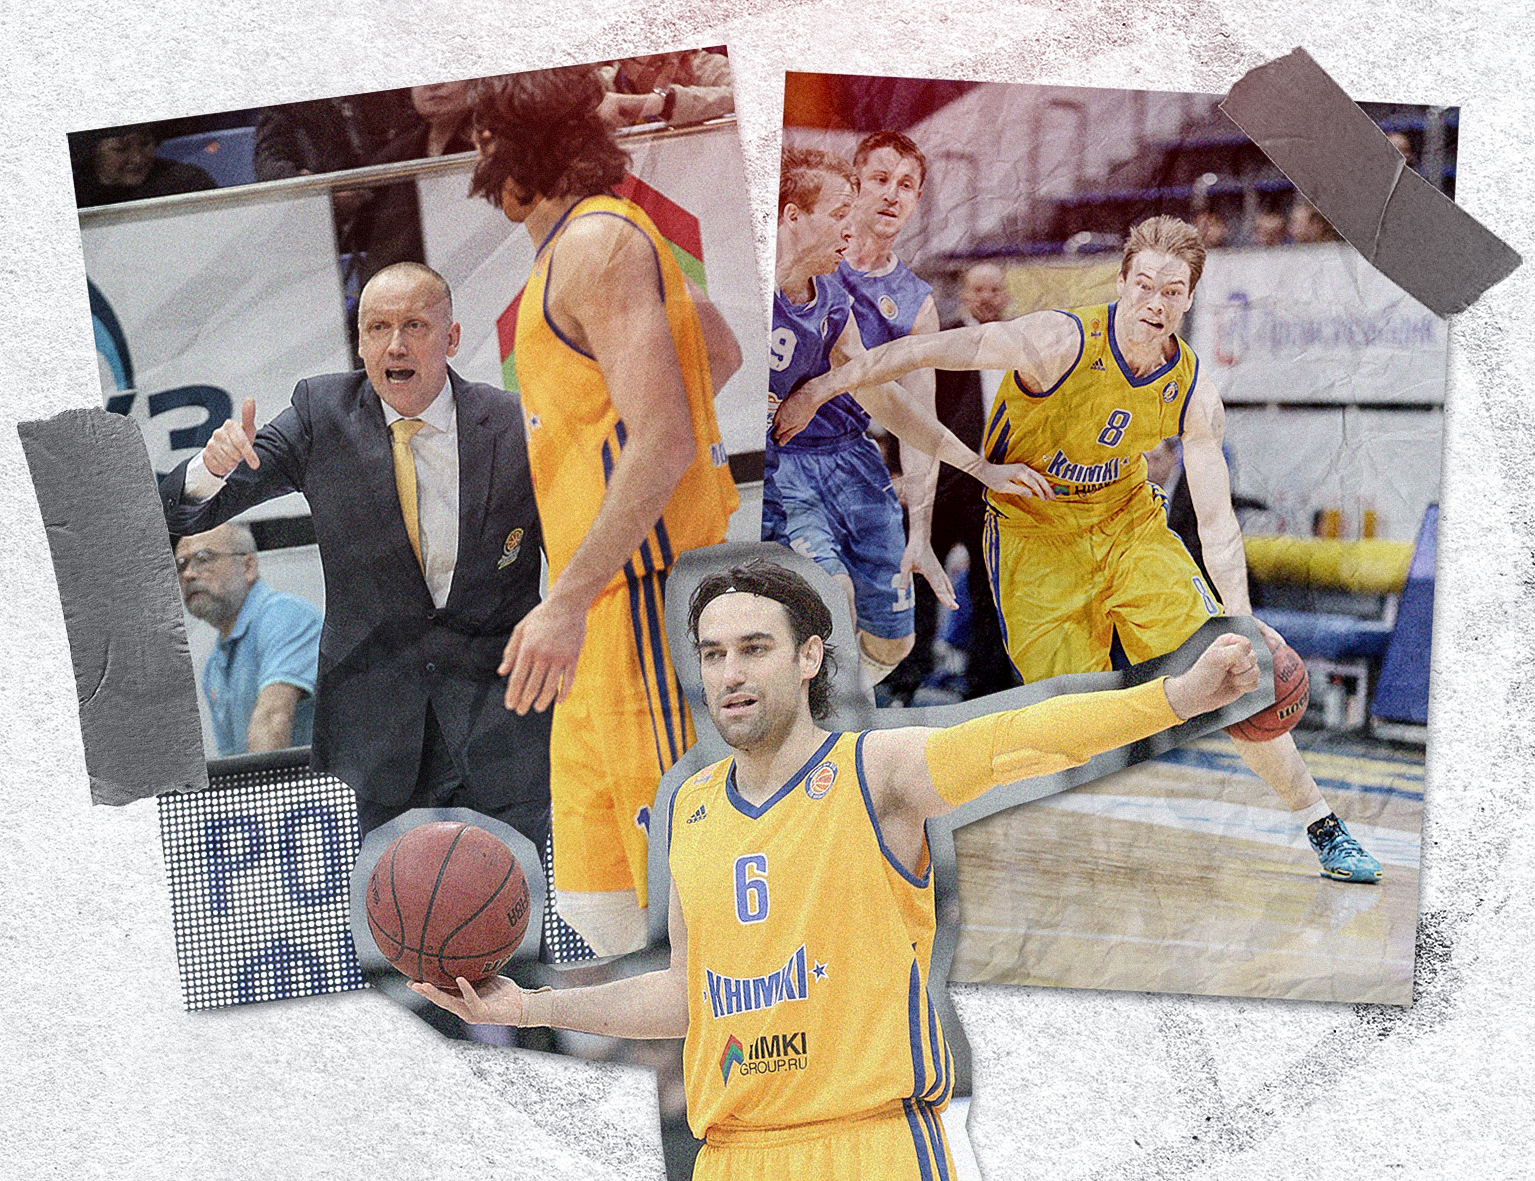 On this historic day: Khimki’s record win